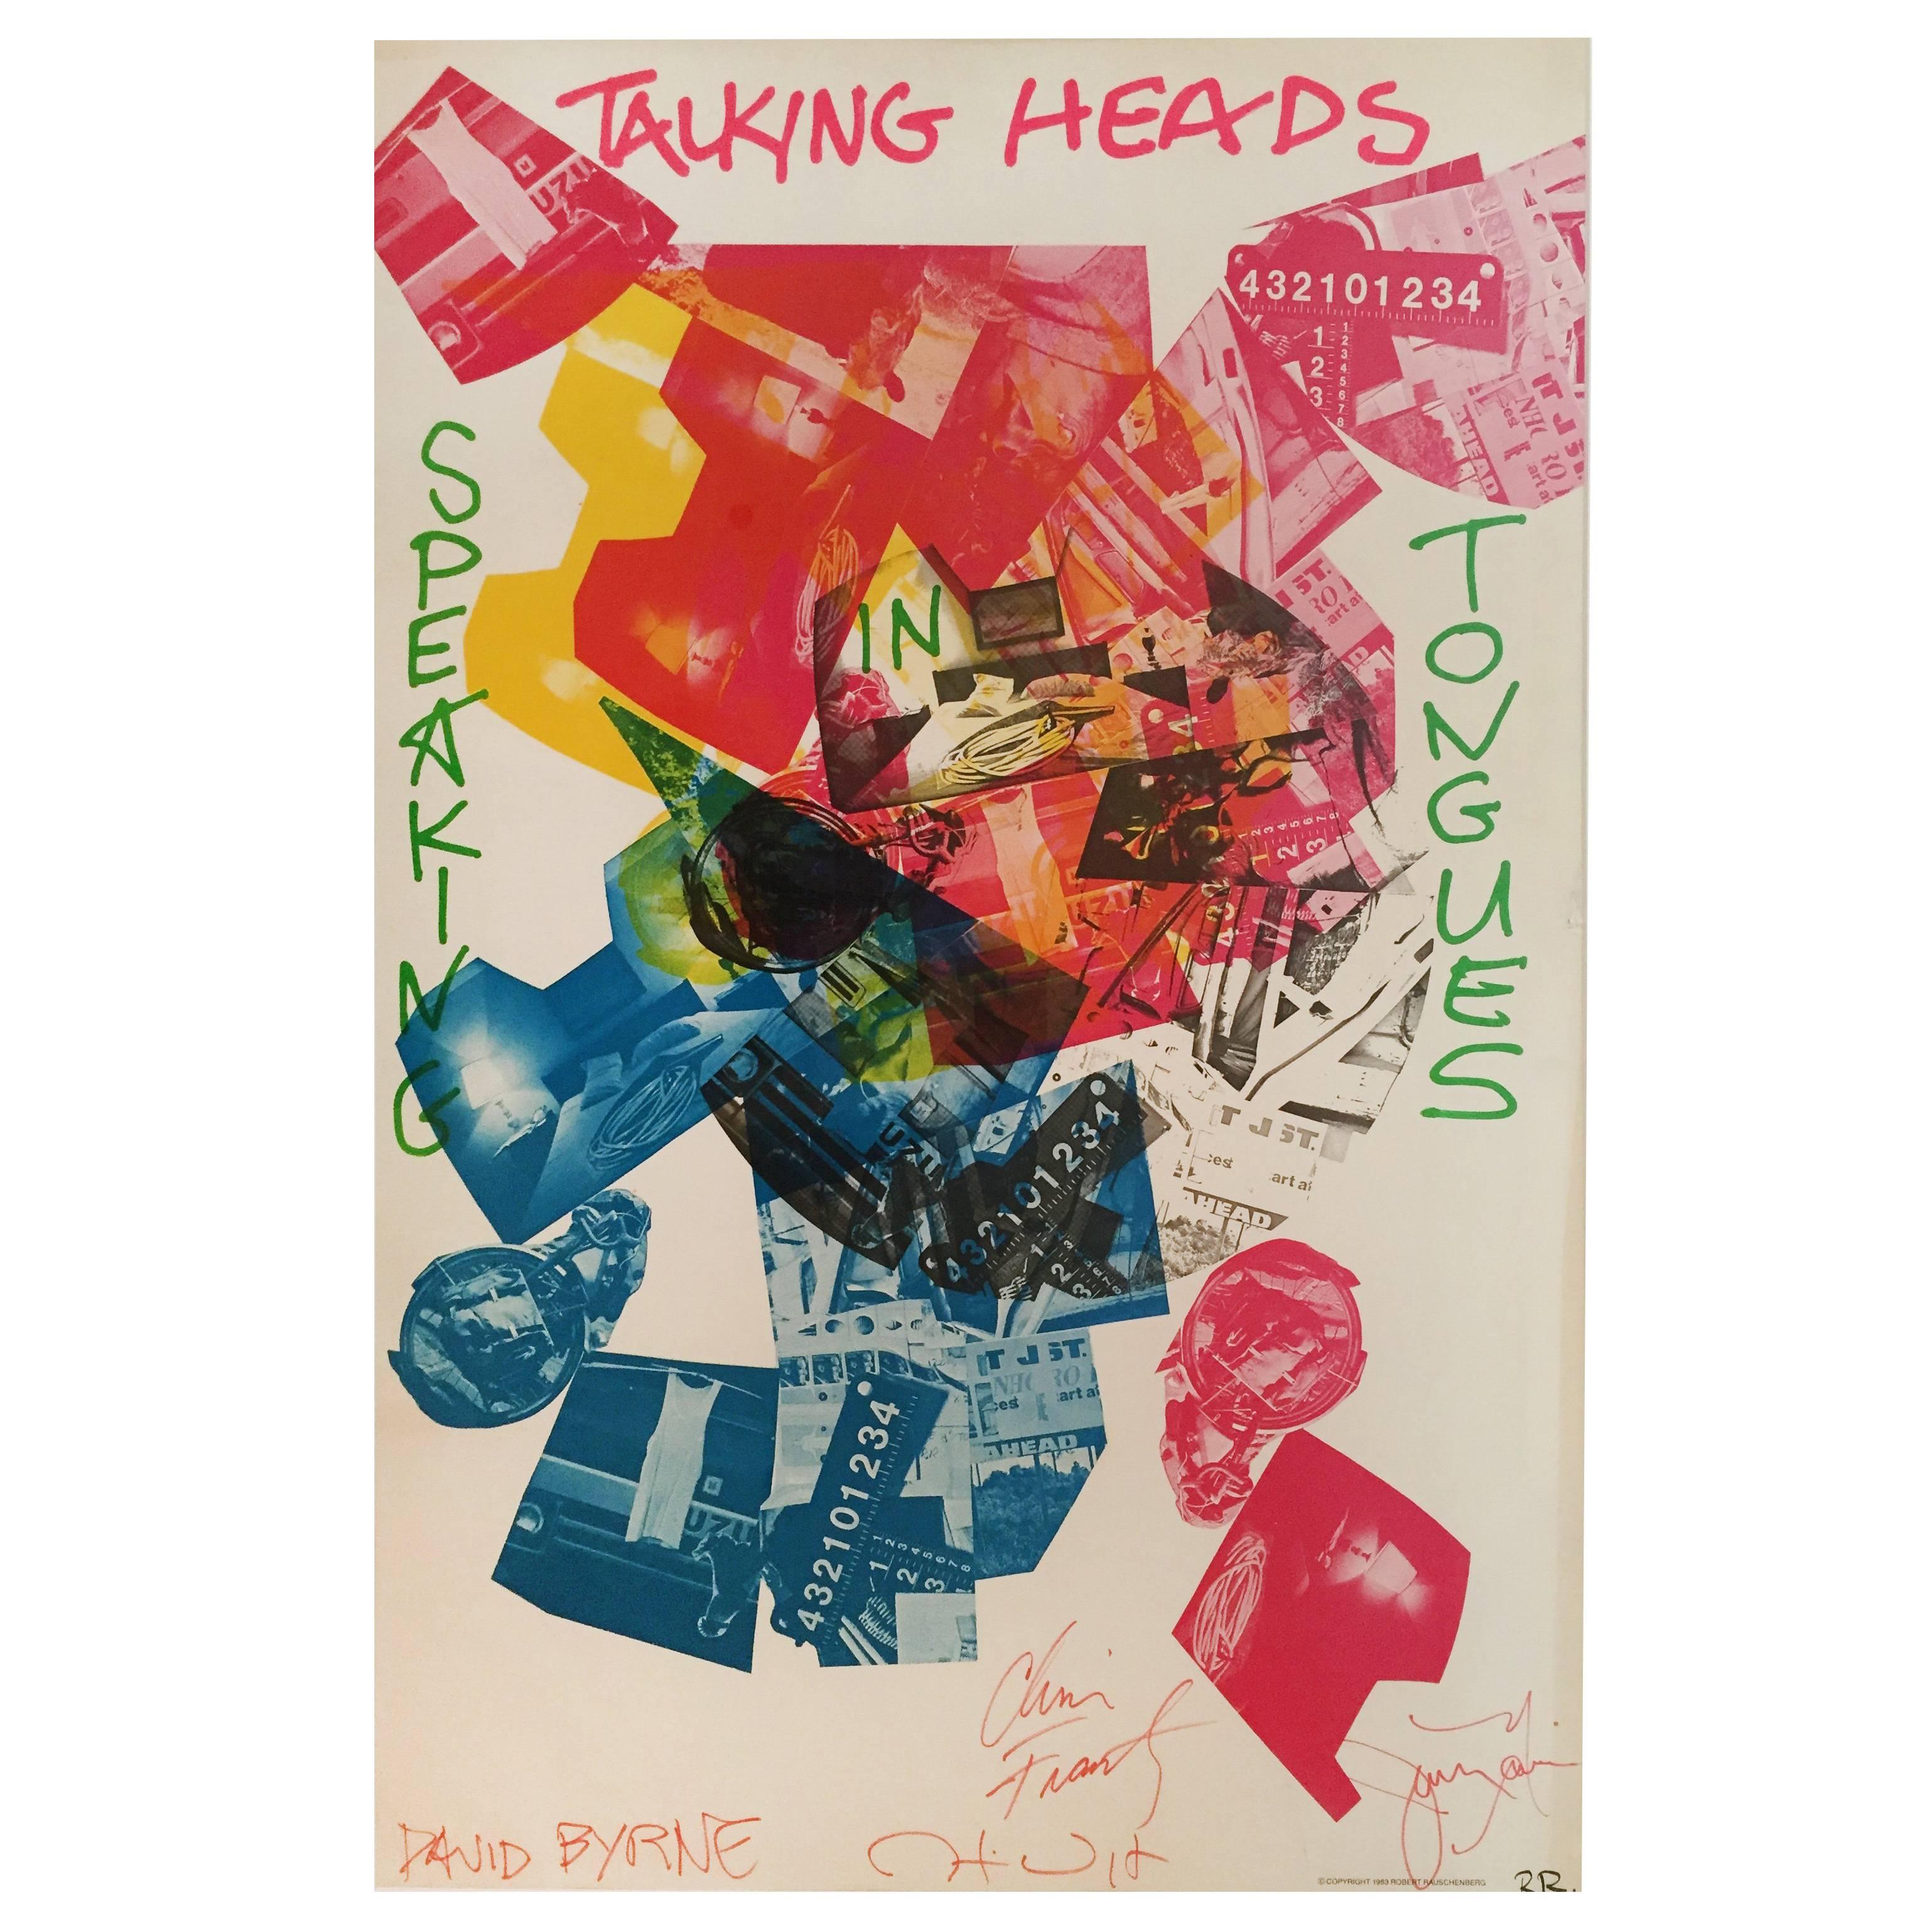 Robert Rauschenberg Poster "Speaking in Tongues, Talking Heads, " Signed 1983